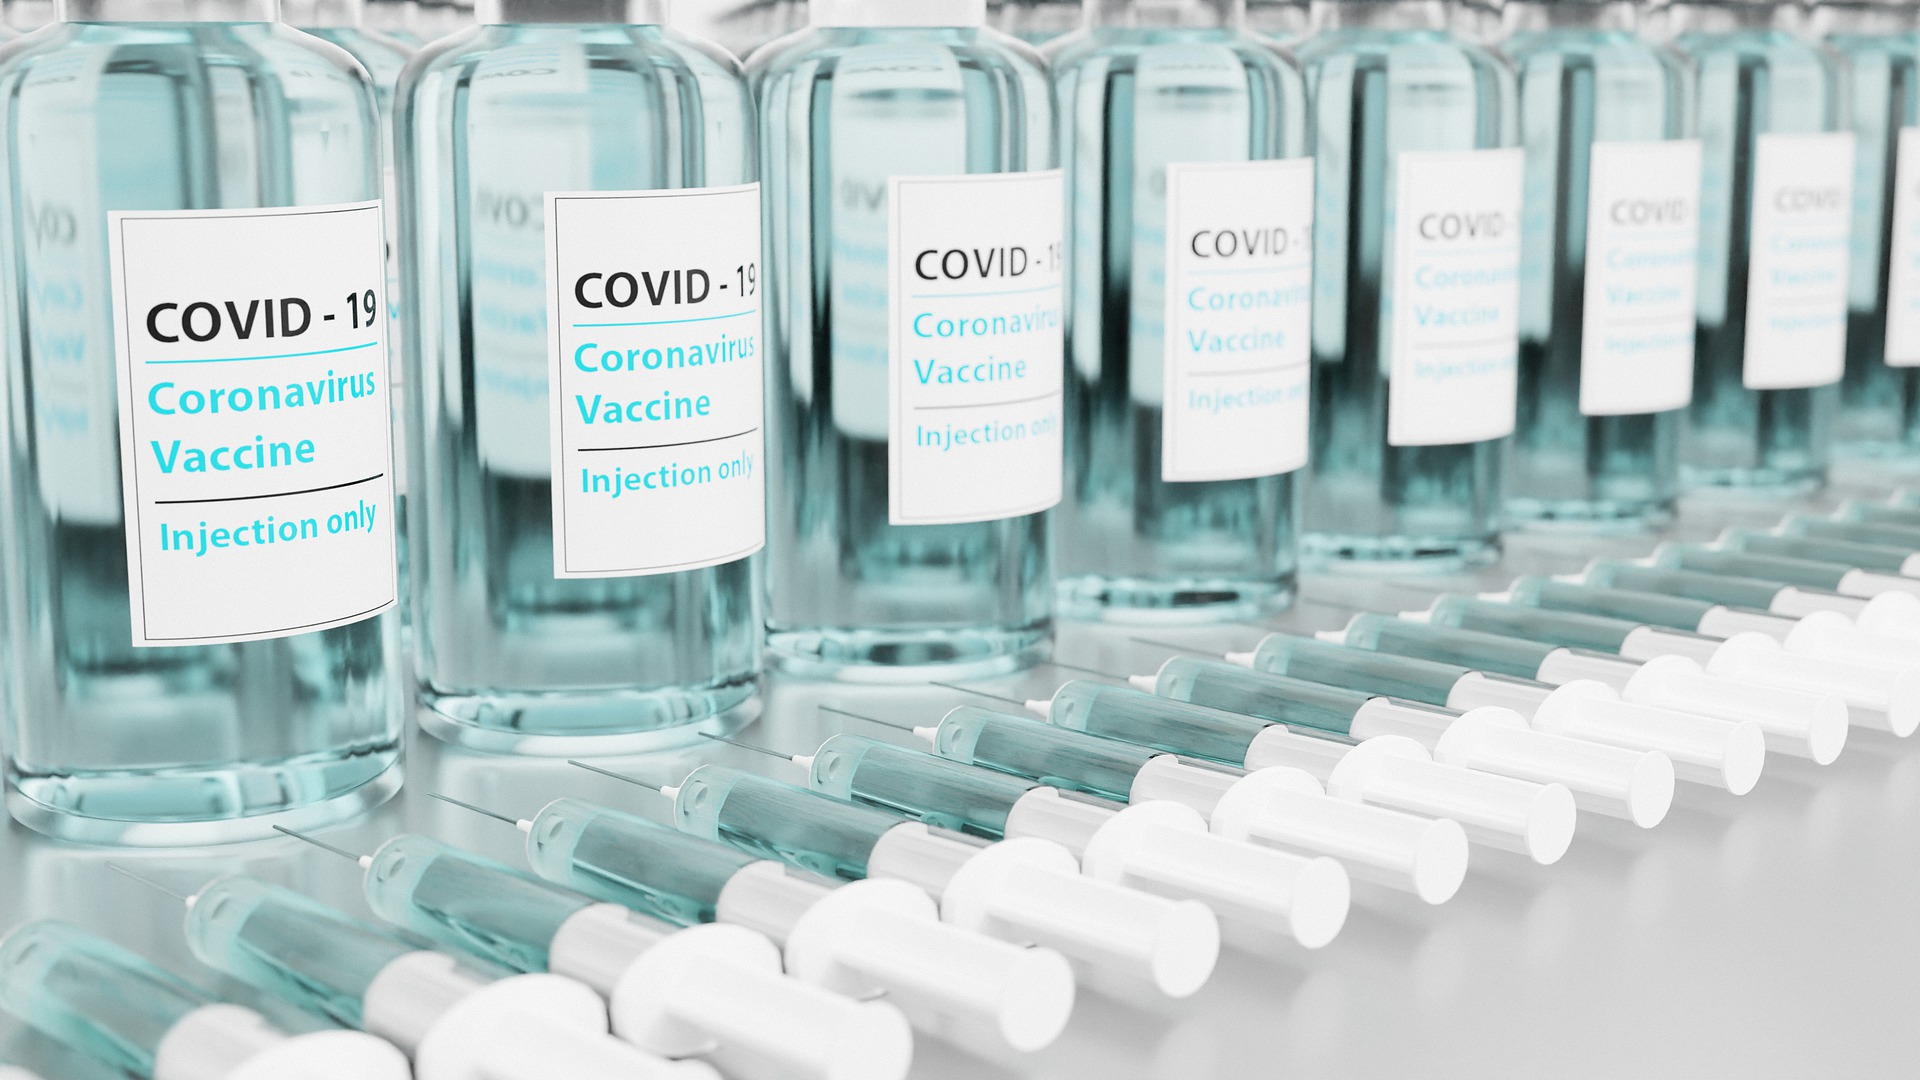 Bottles of COVID-19 vaccines and syringes.